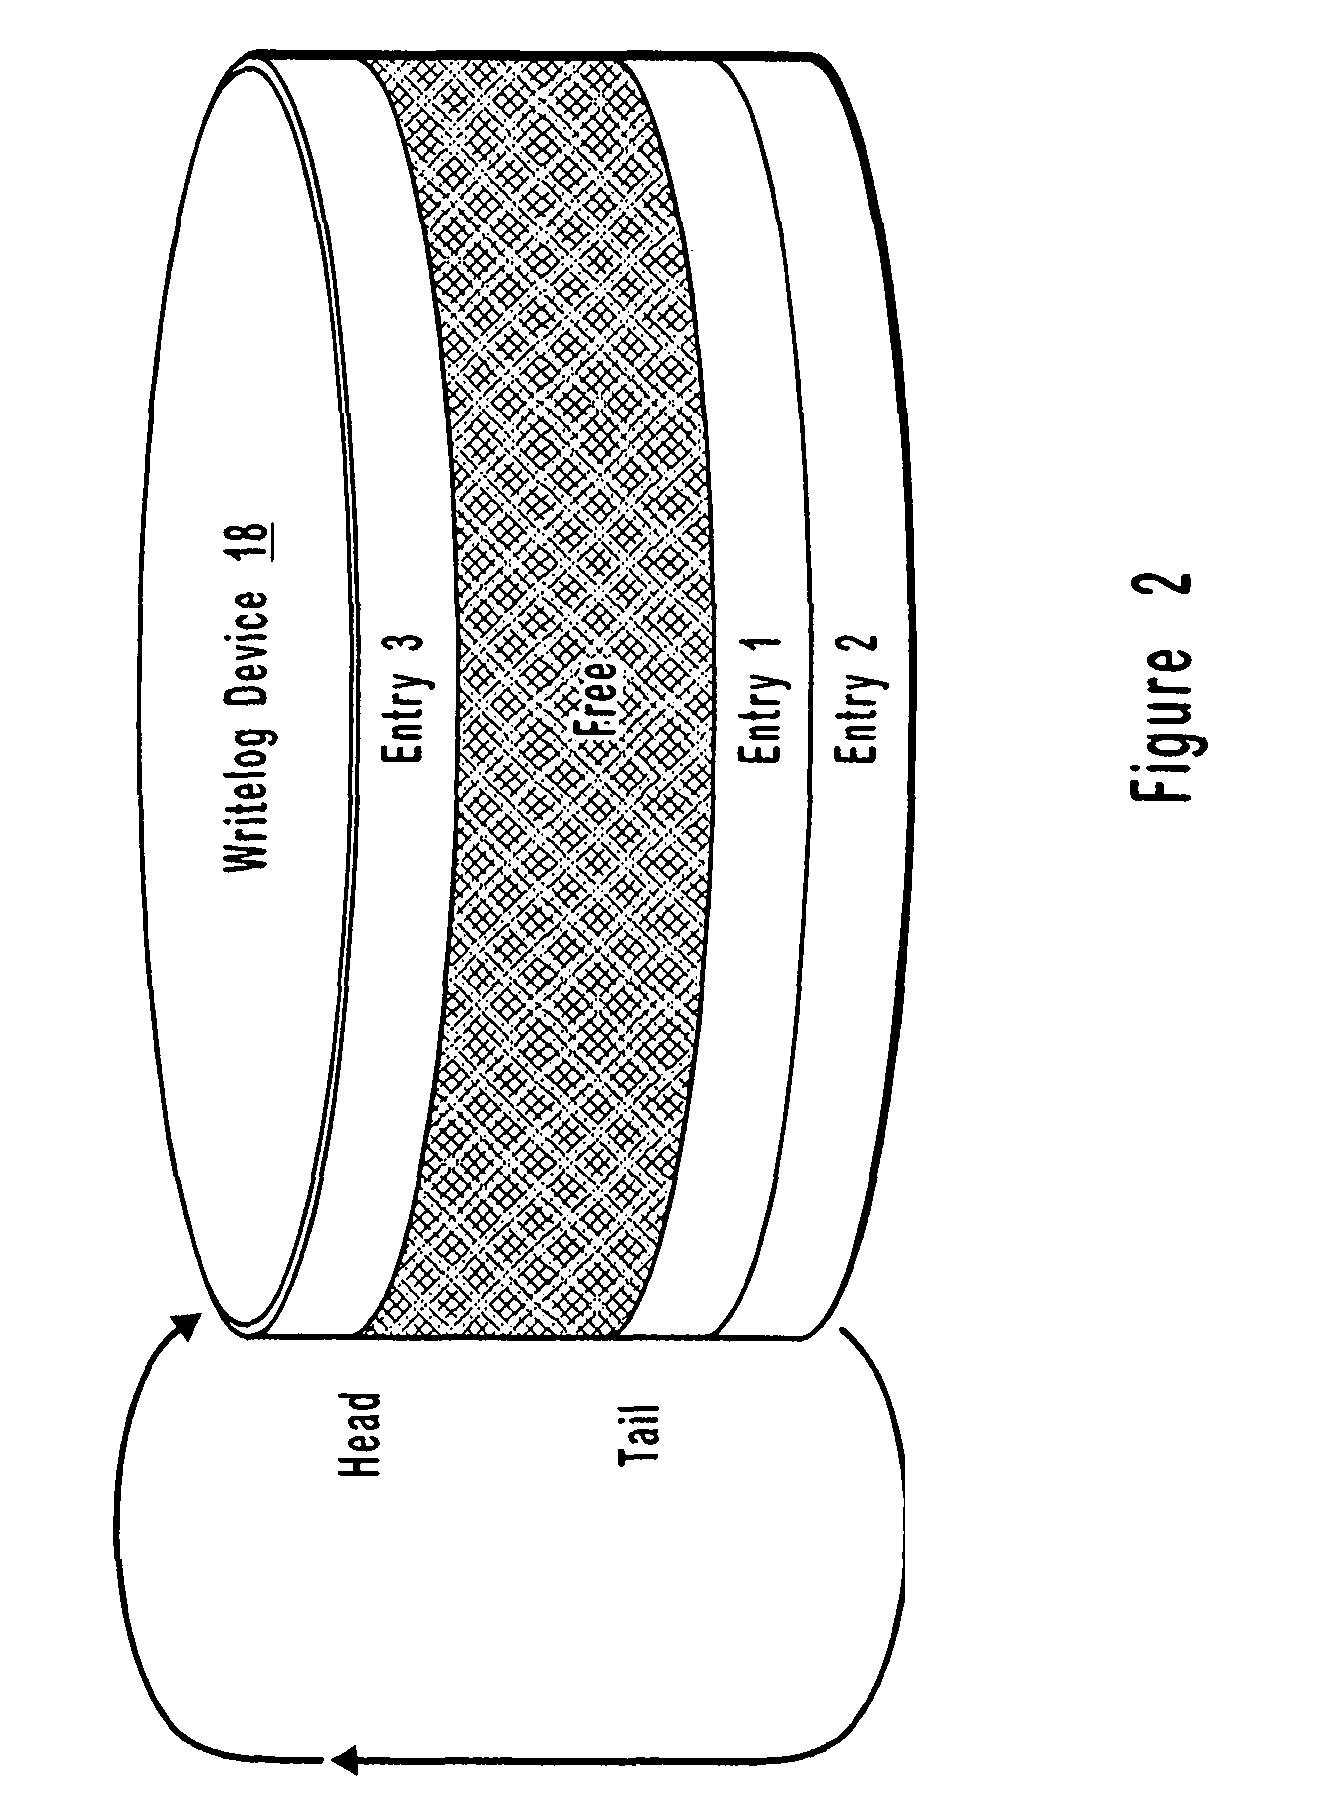 Resource allocation throttling in remote data mirroring system